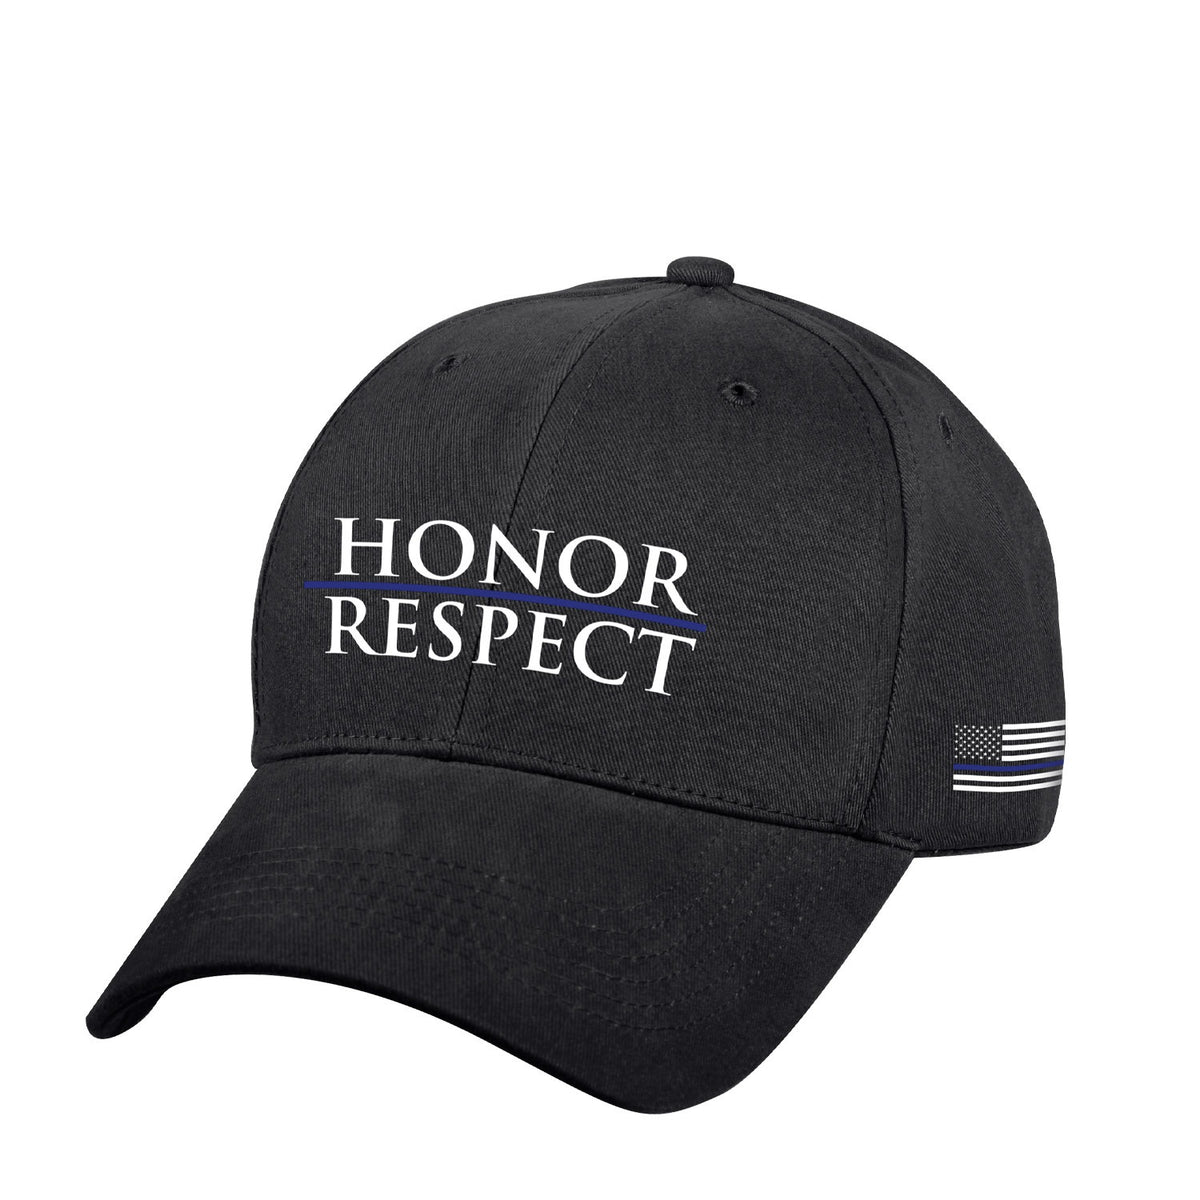 Rothco Honor and Respect Thin Blue Line Low Profile Cap - Black